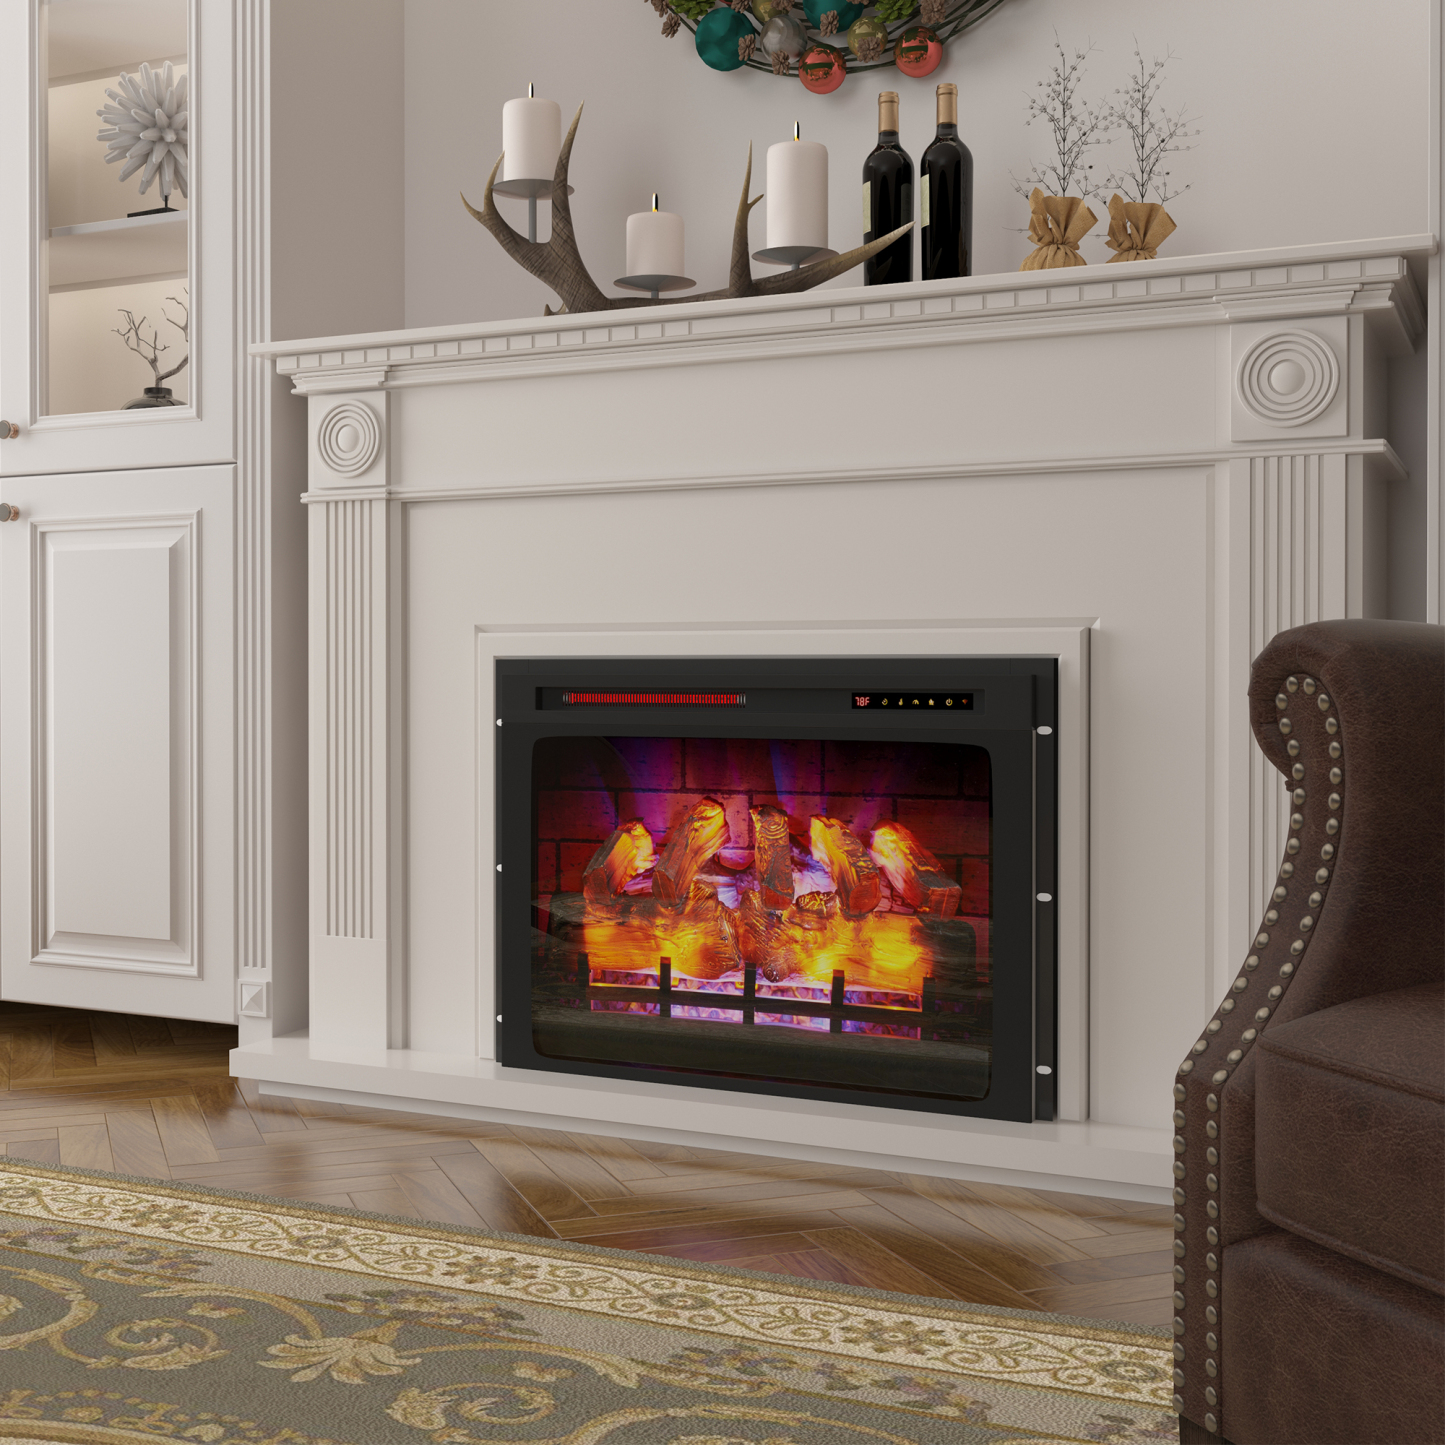 Mondawe 28 in. 5120 BTU Recessed Electric Fireplace with Double Overheat Protection & Remote Control and Touch Screen-Mondawe